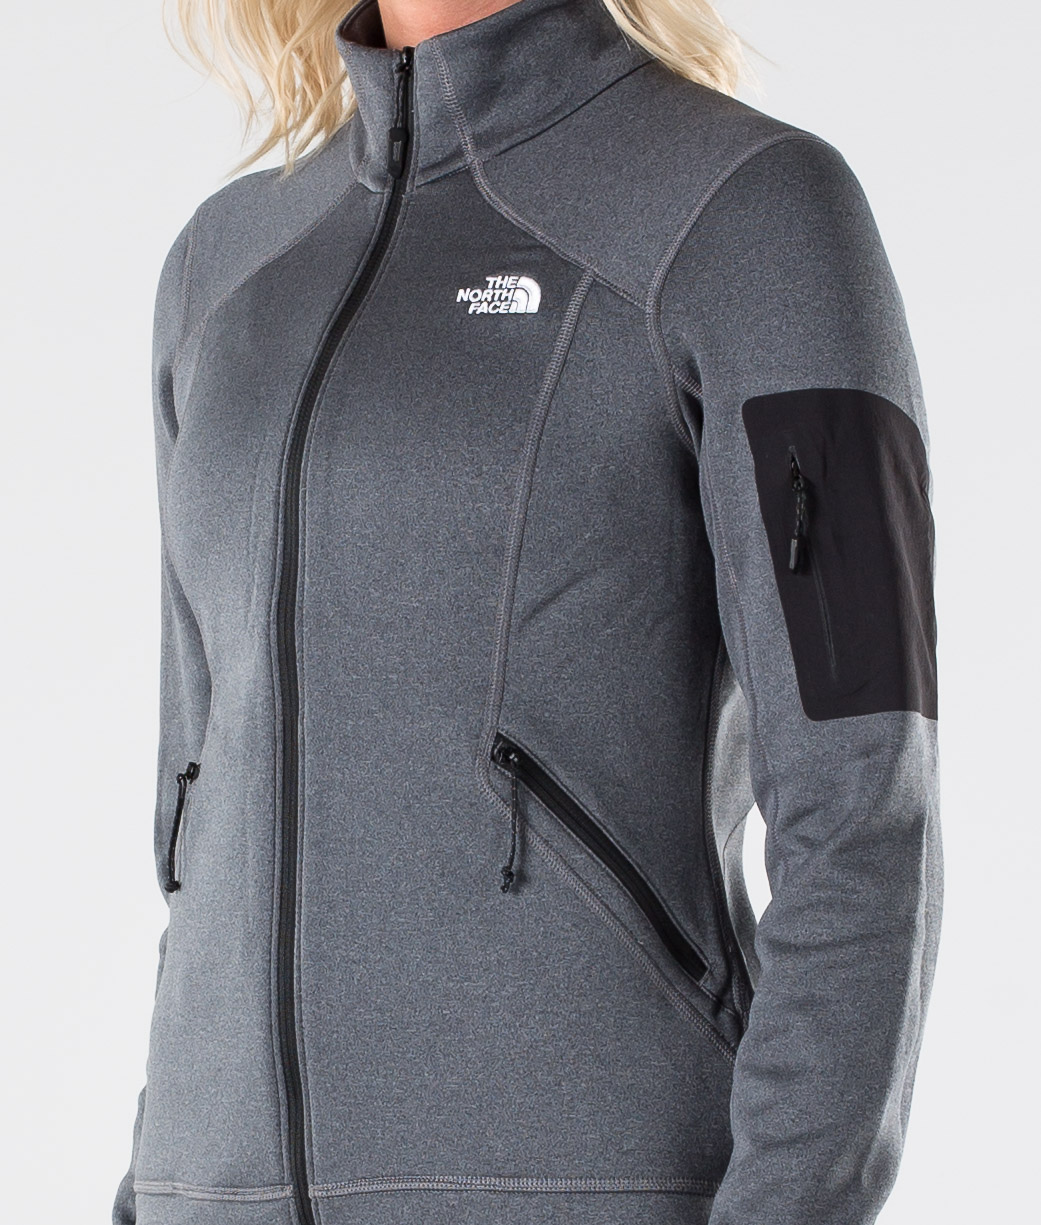 the north face impendor review